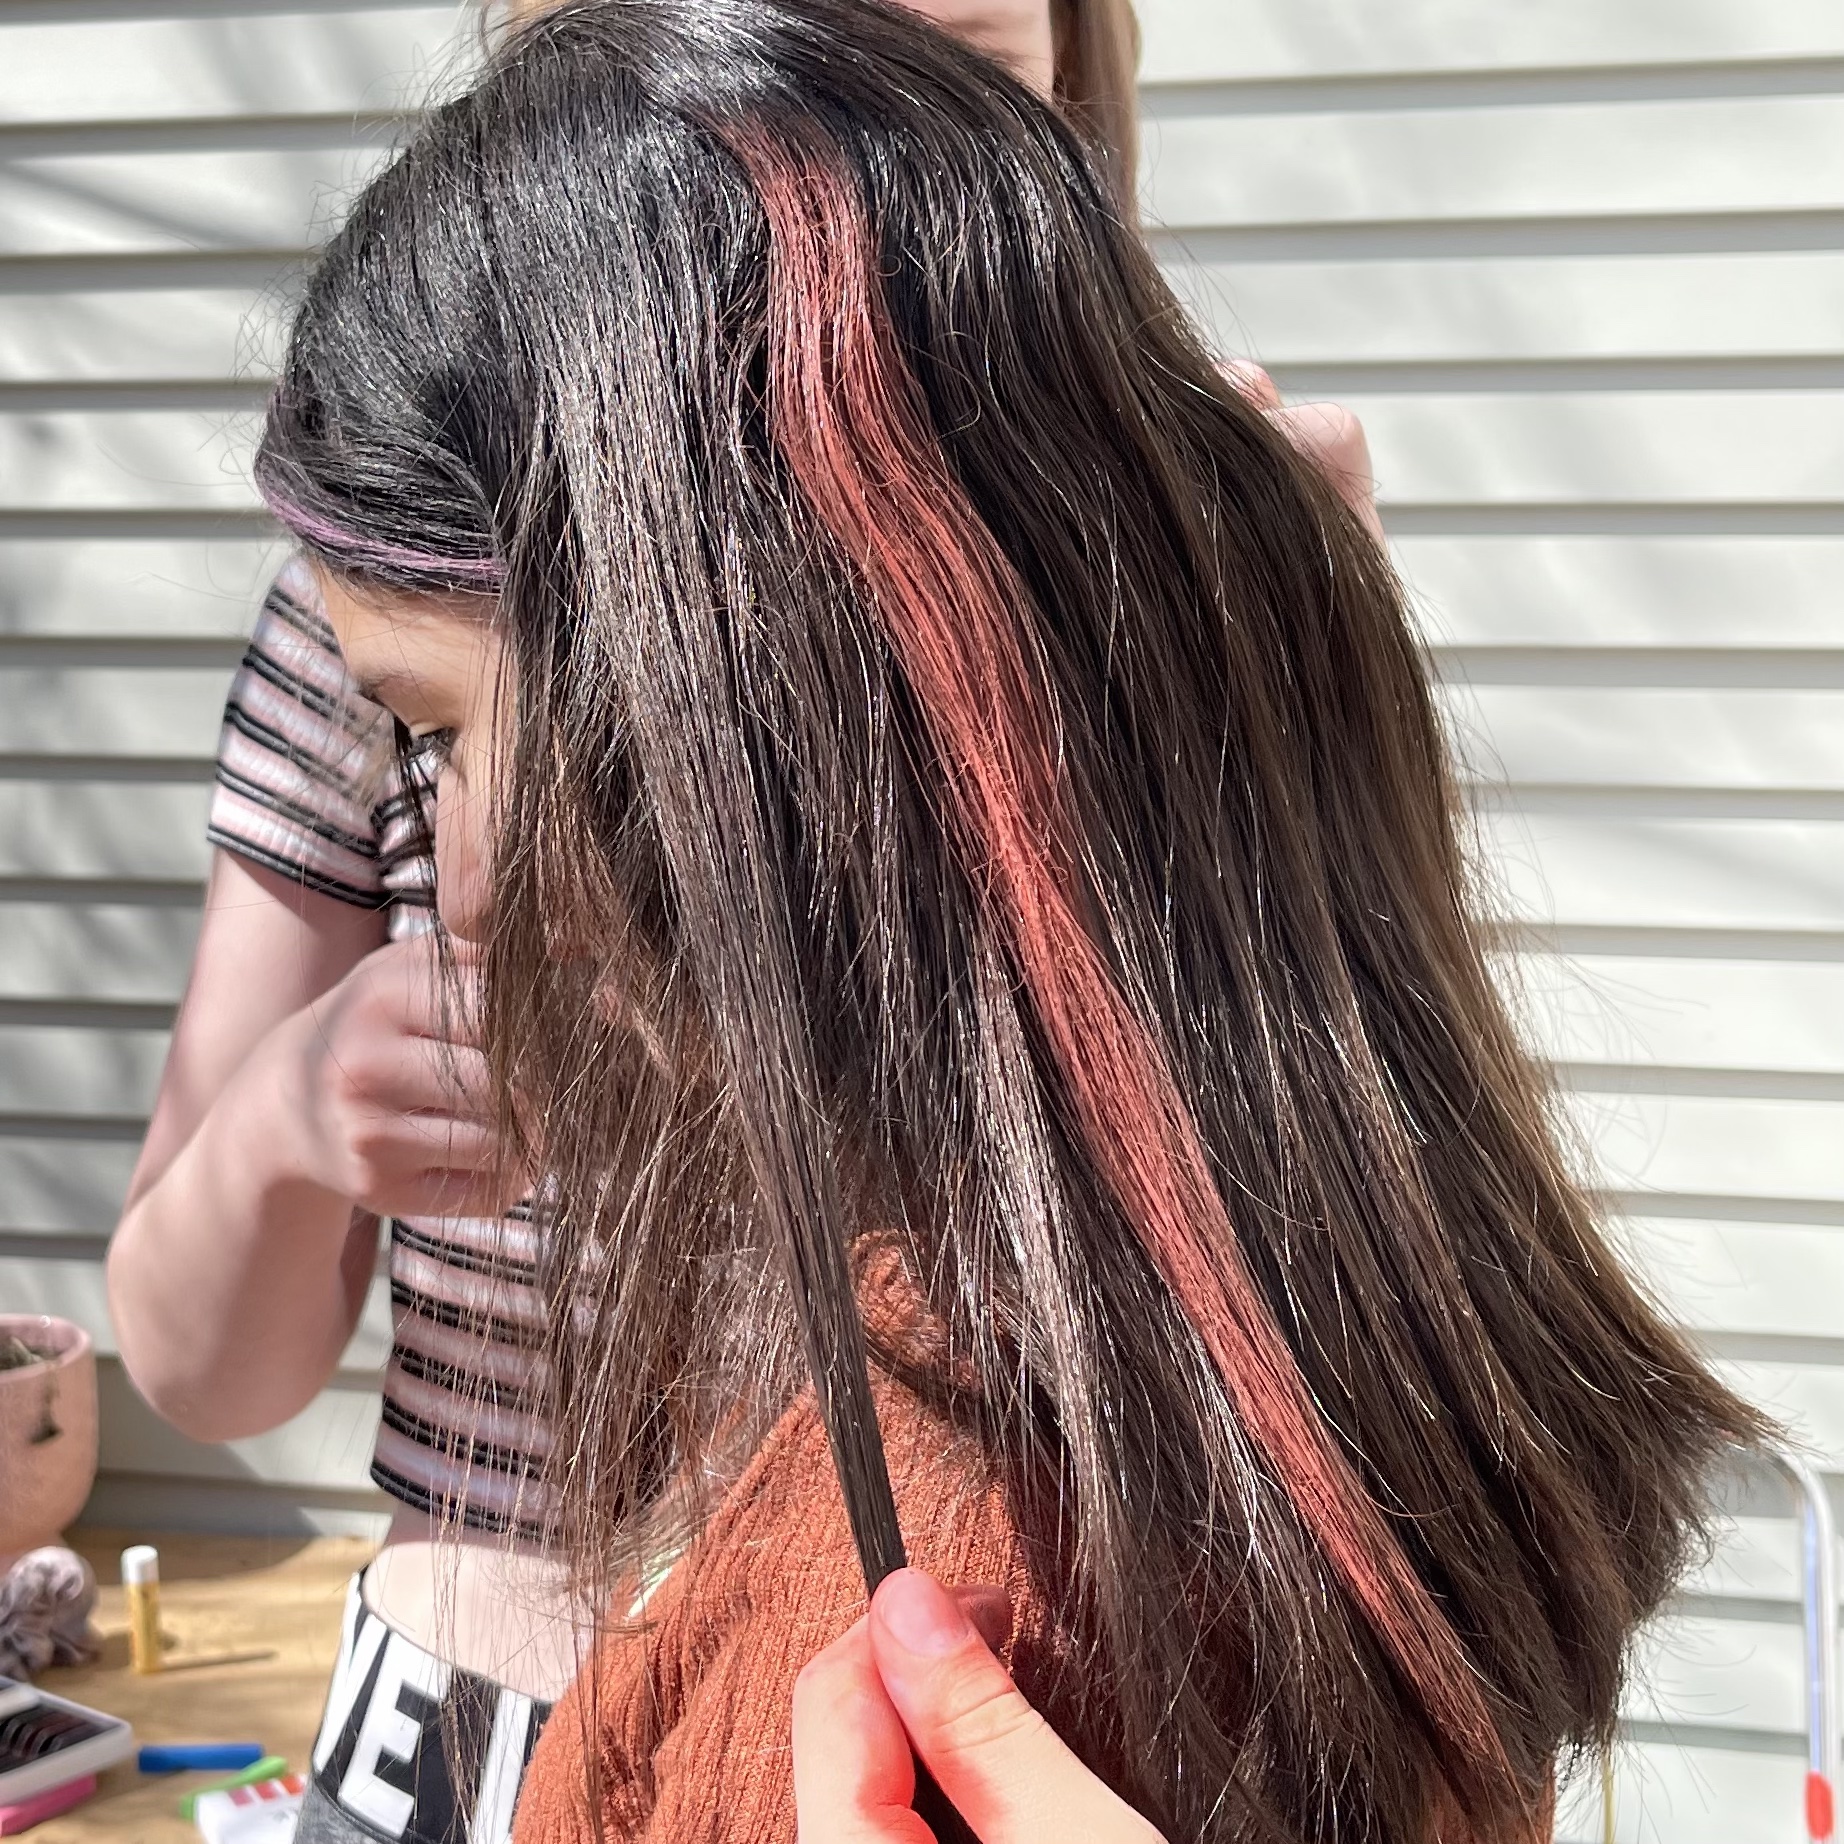 a vivid red streak from hair chalk in a child's long black hair